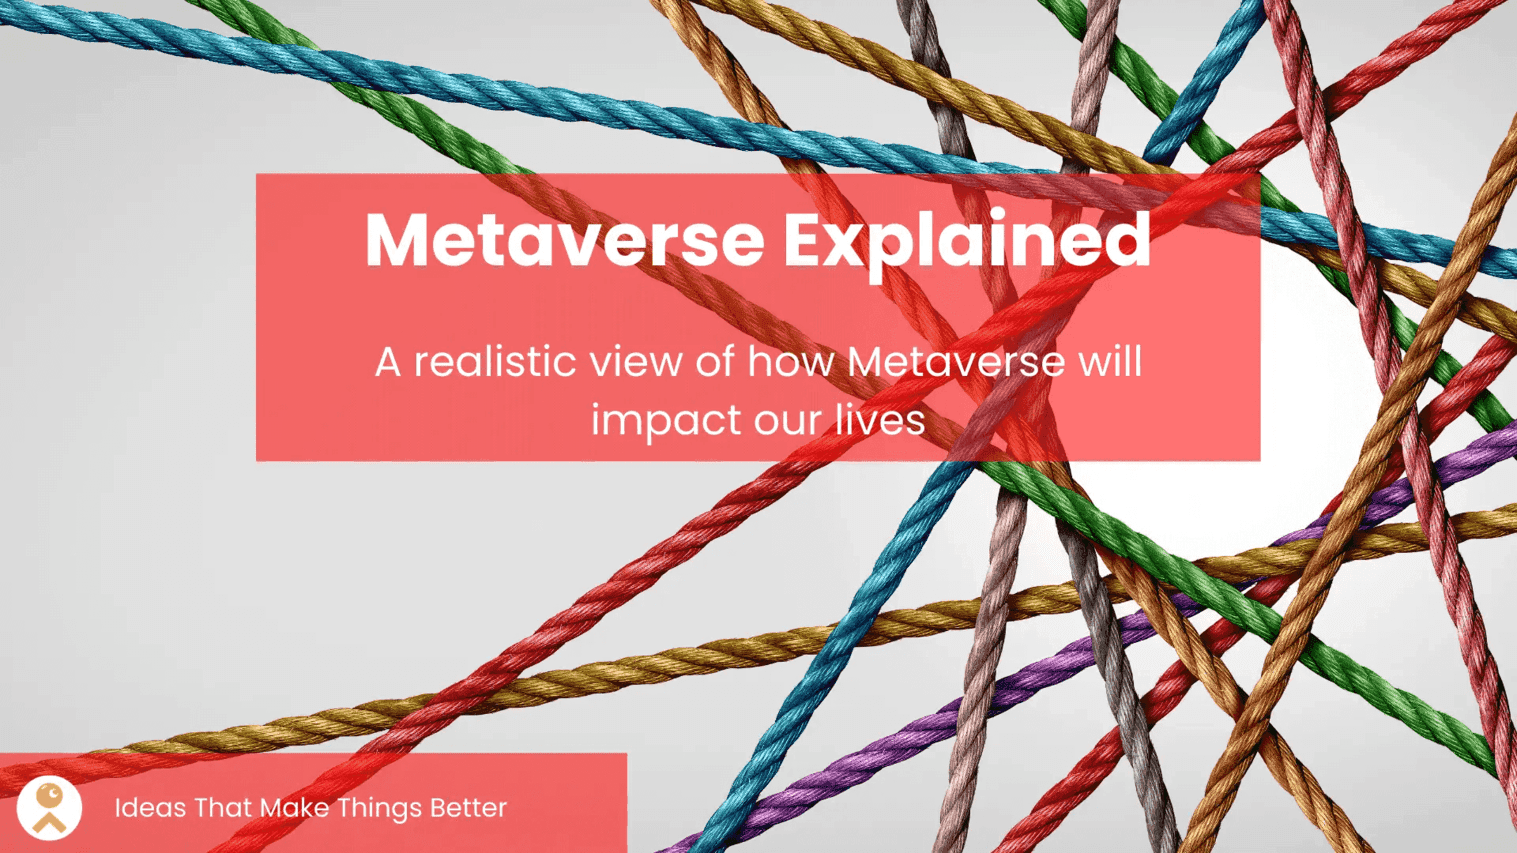 How metaverse will impact our lives and businesses